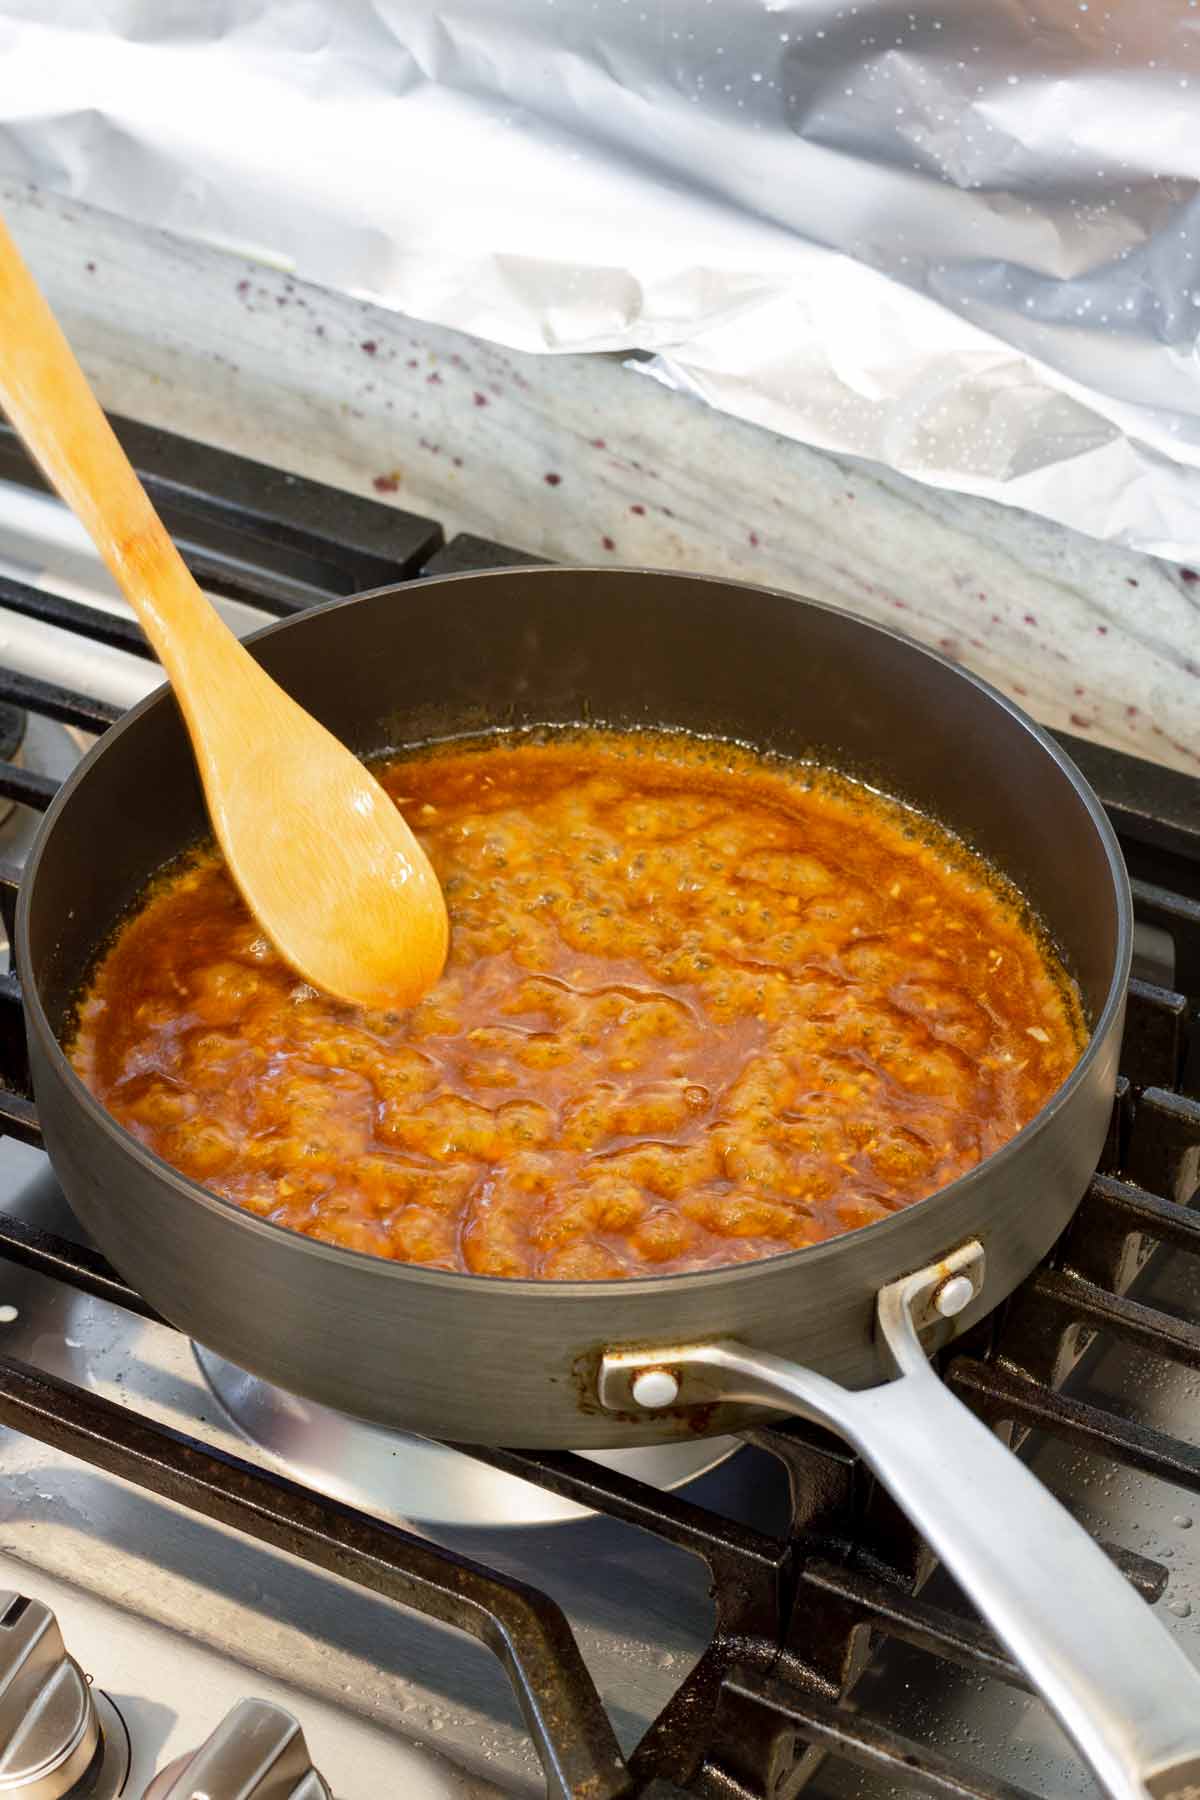 simmering the sauce in a skillet over the stove